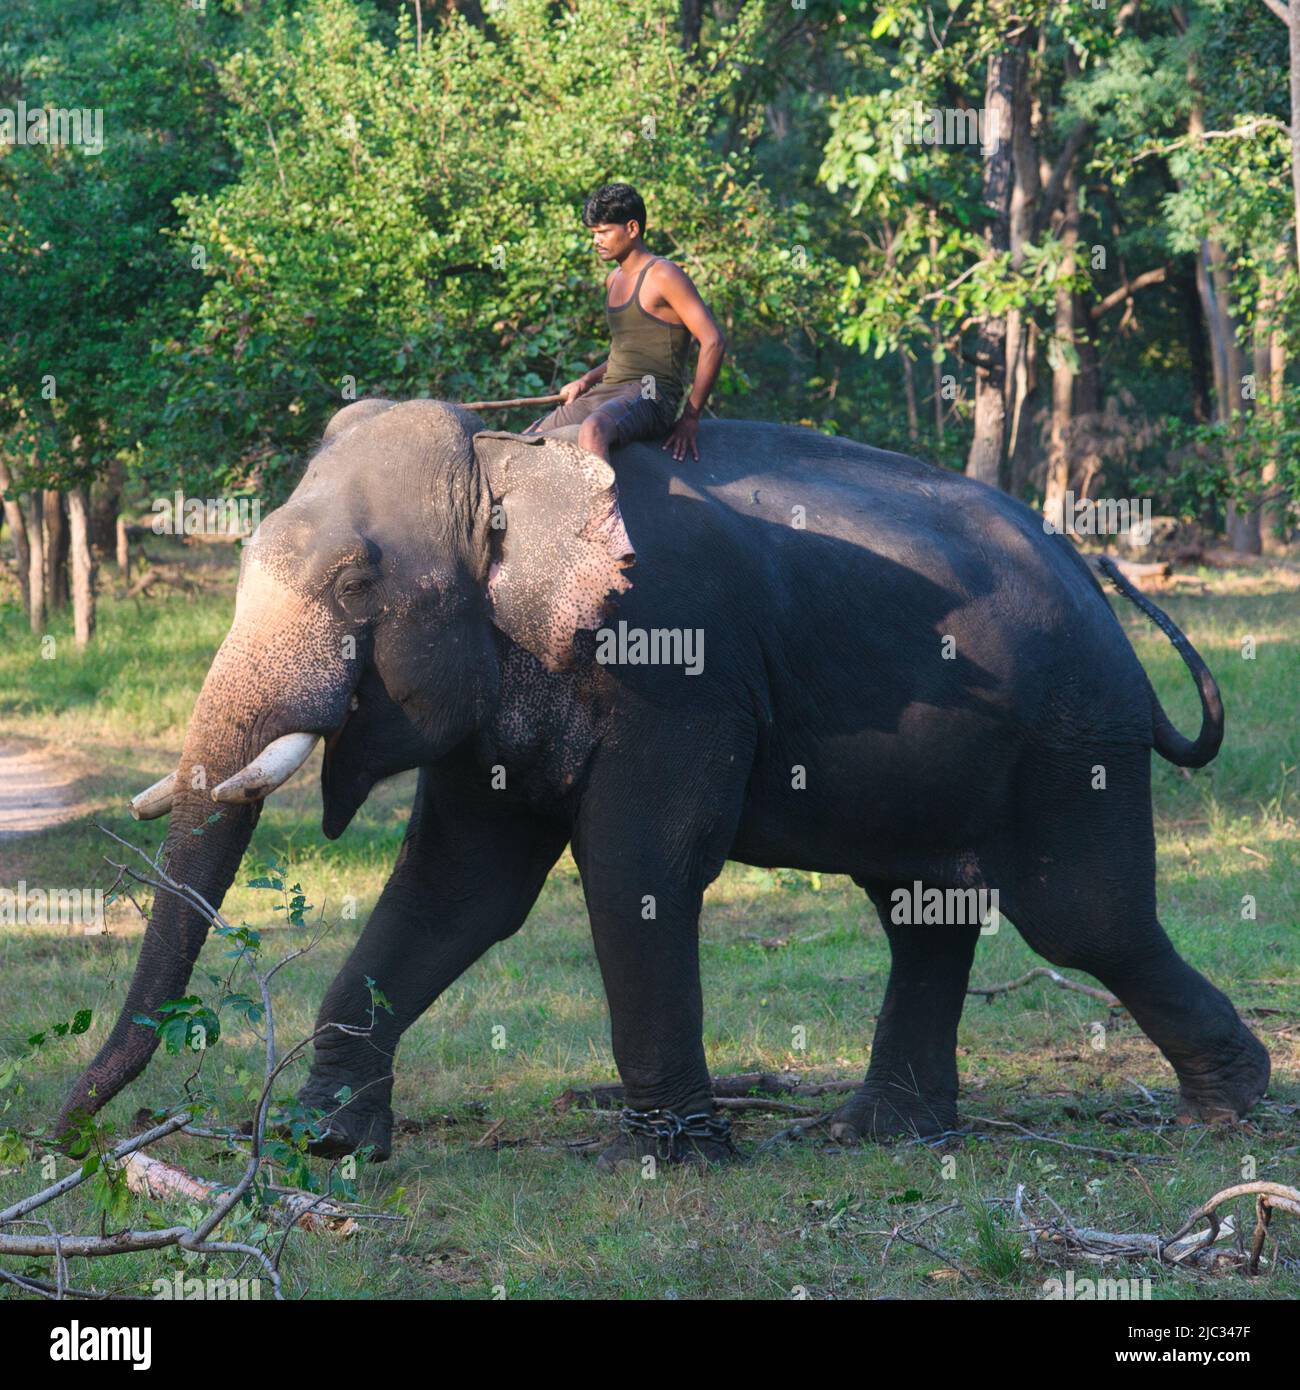 Pench, India - 21 October 2021: A mahut riding a working elephant in a forest in Pench National Park, India Stock Photo